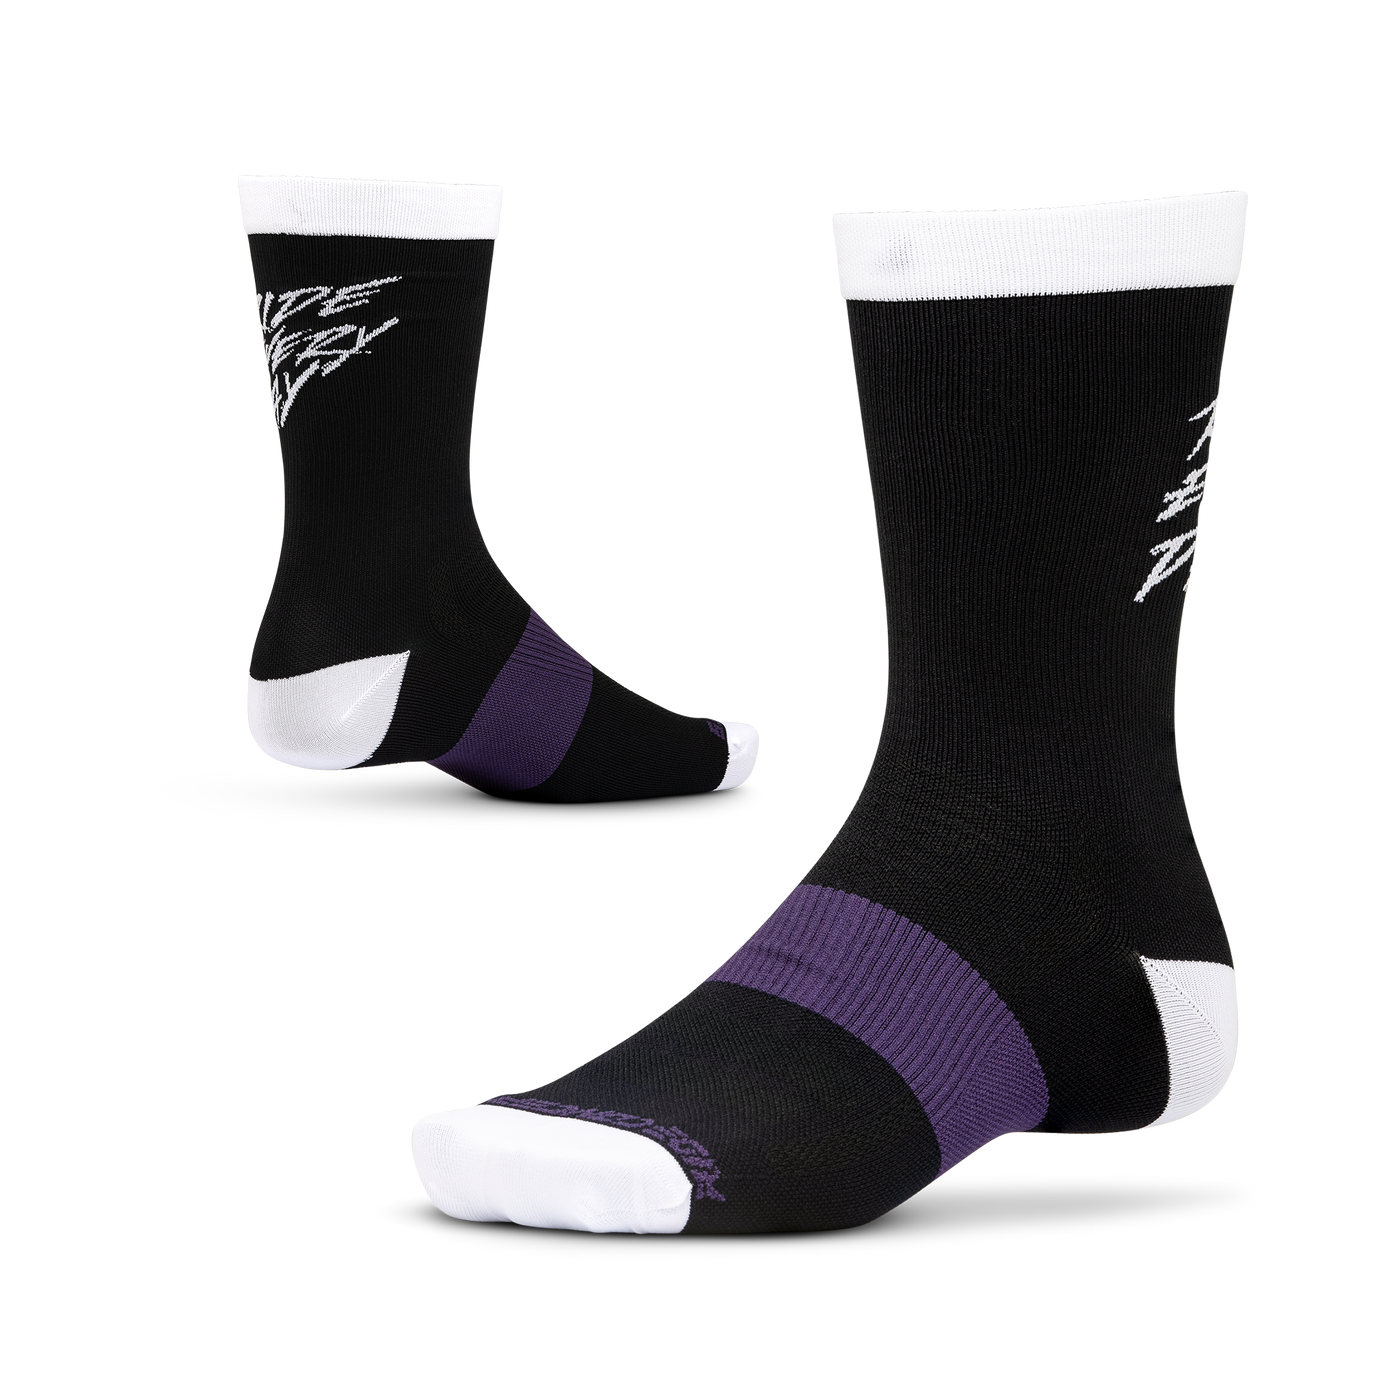 Ride Concepts Ride Every Day MTB Sock - Synthetic 8" - Black and White